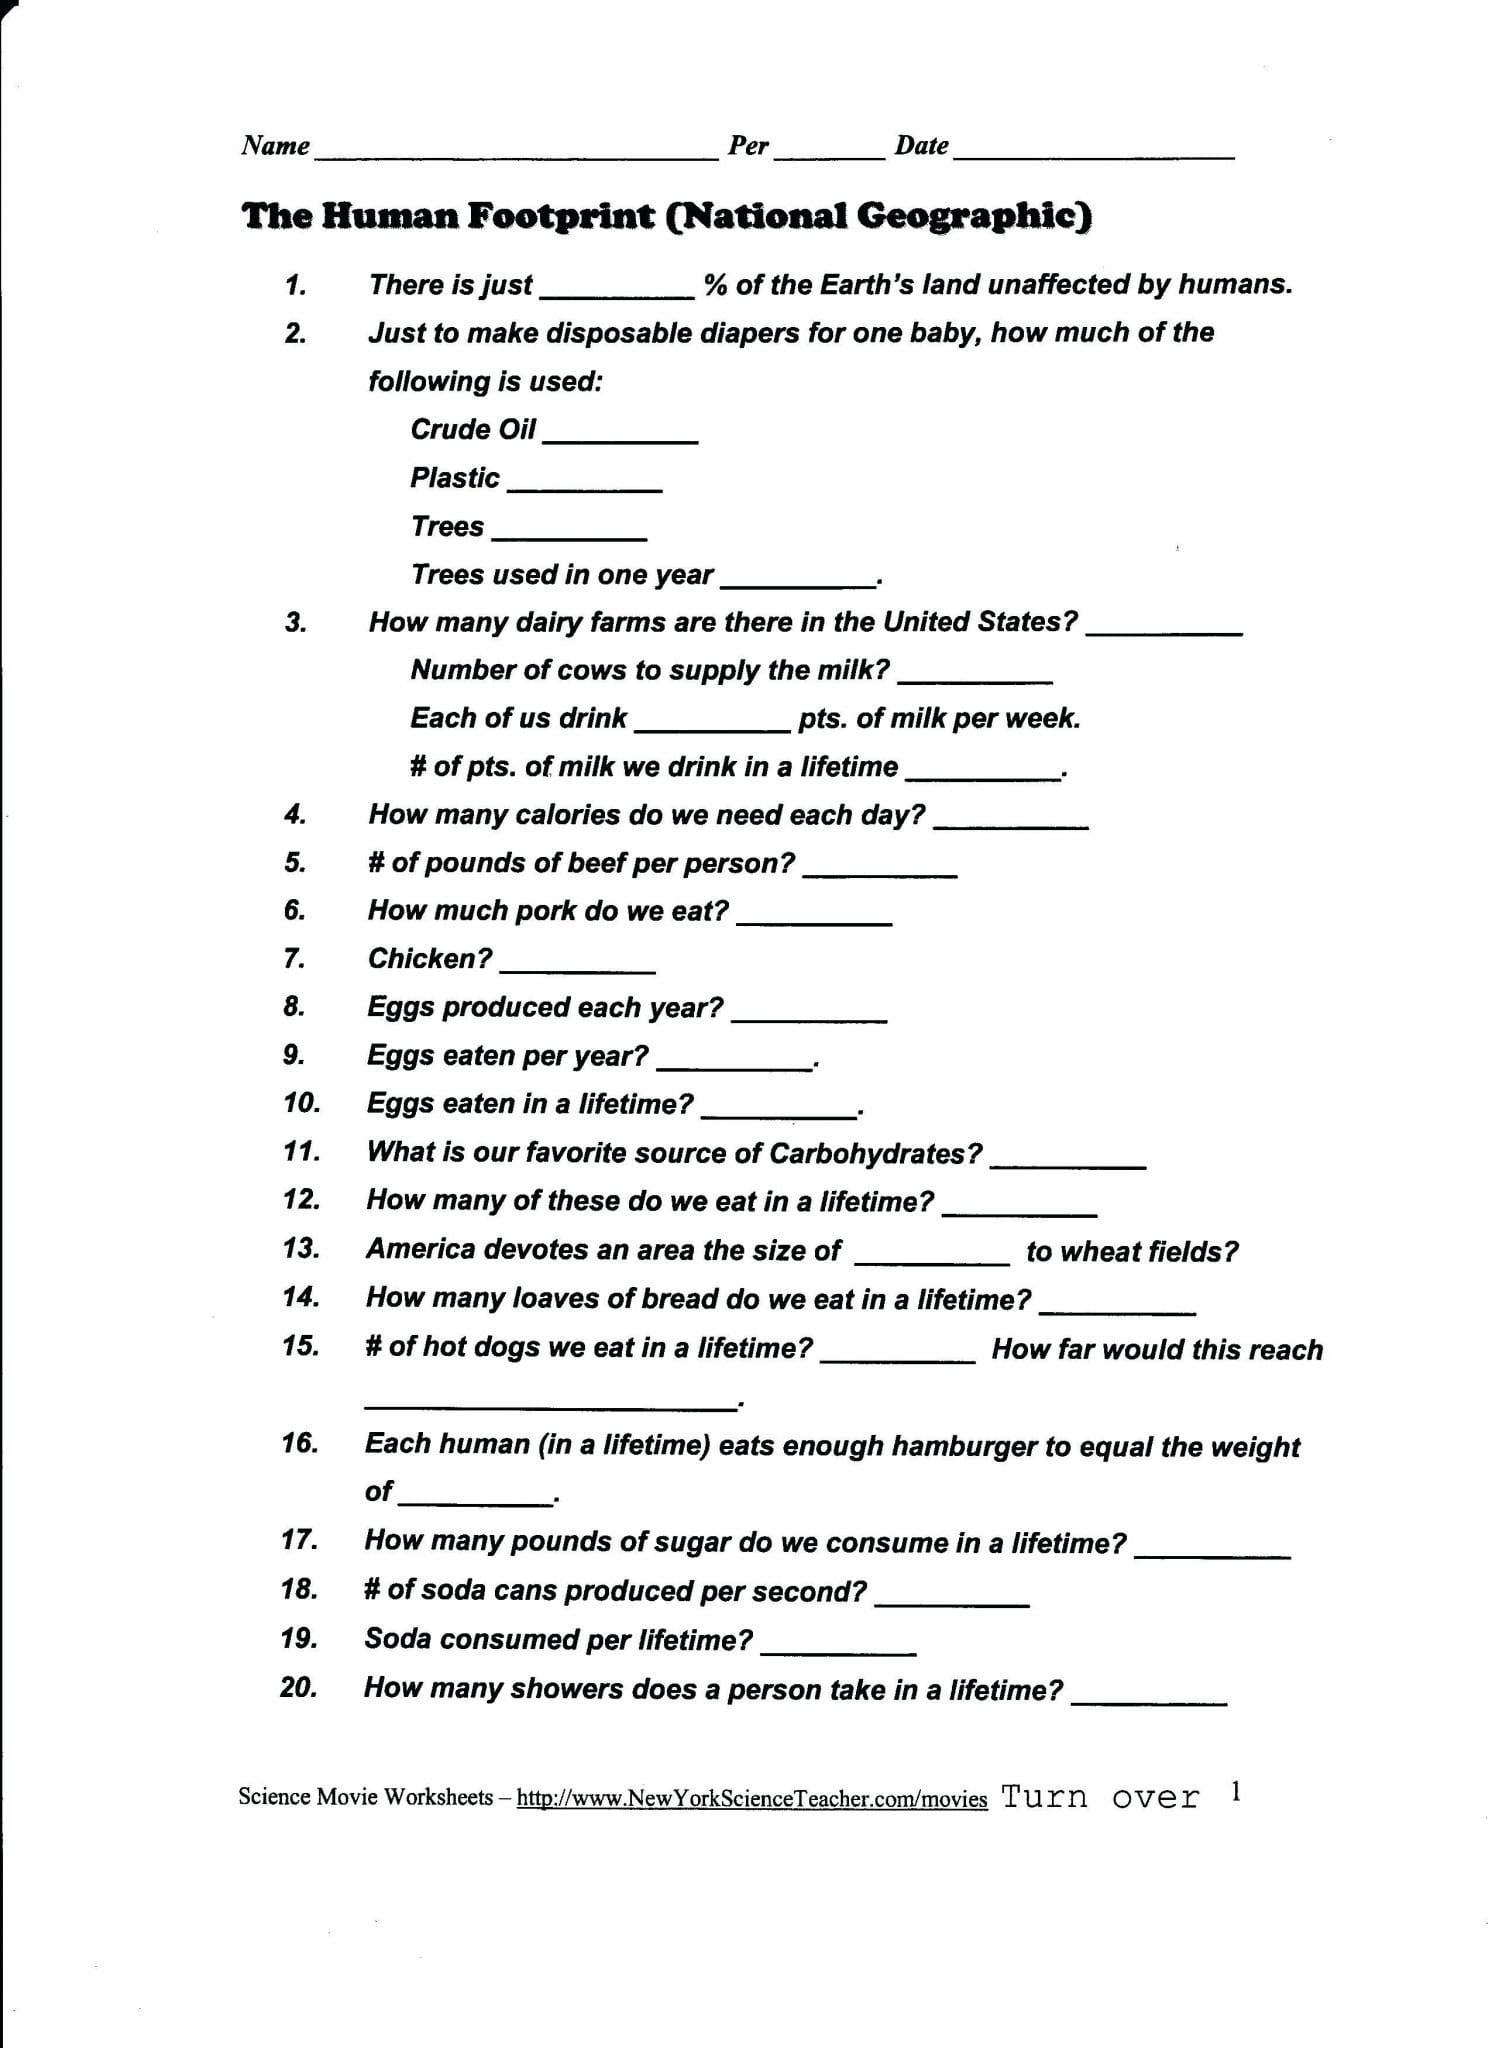 Ecological Footprint Worksheet Answers  Briefencounters Together With The Human Footprint National Geographic Worksheet Answers